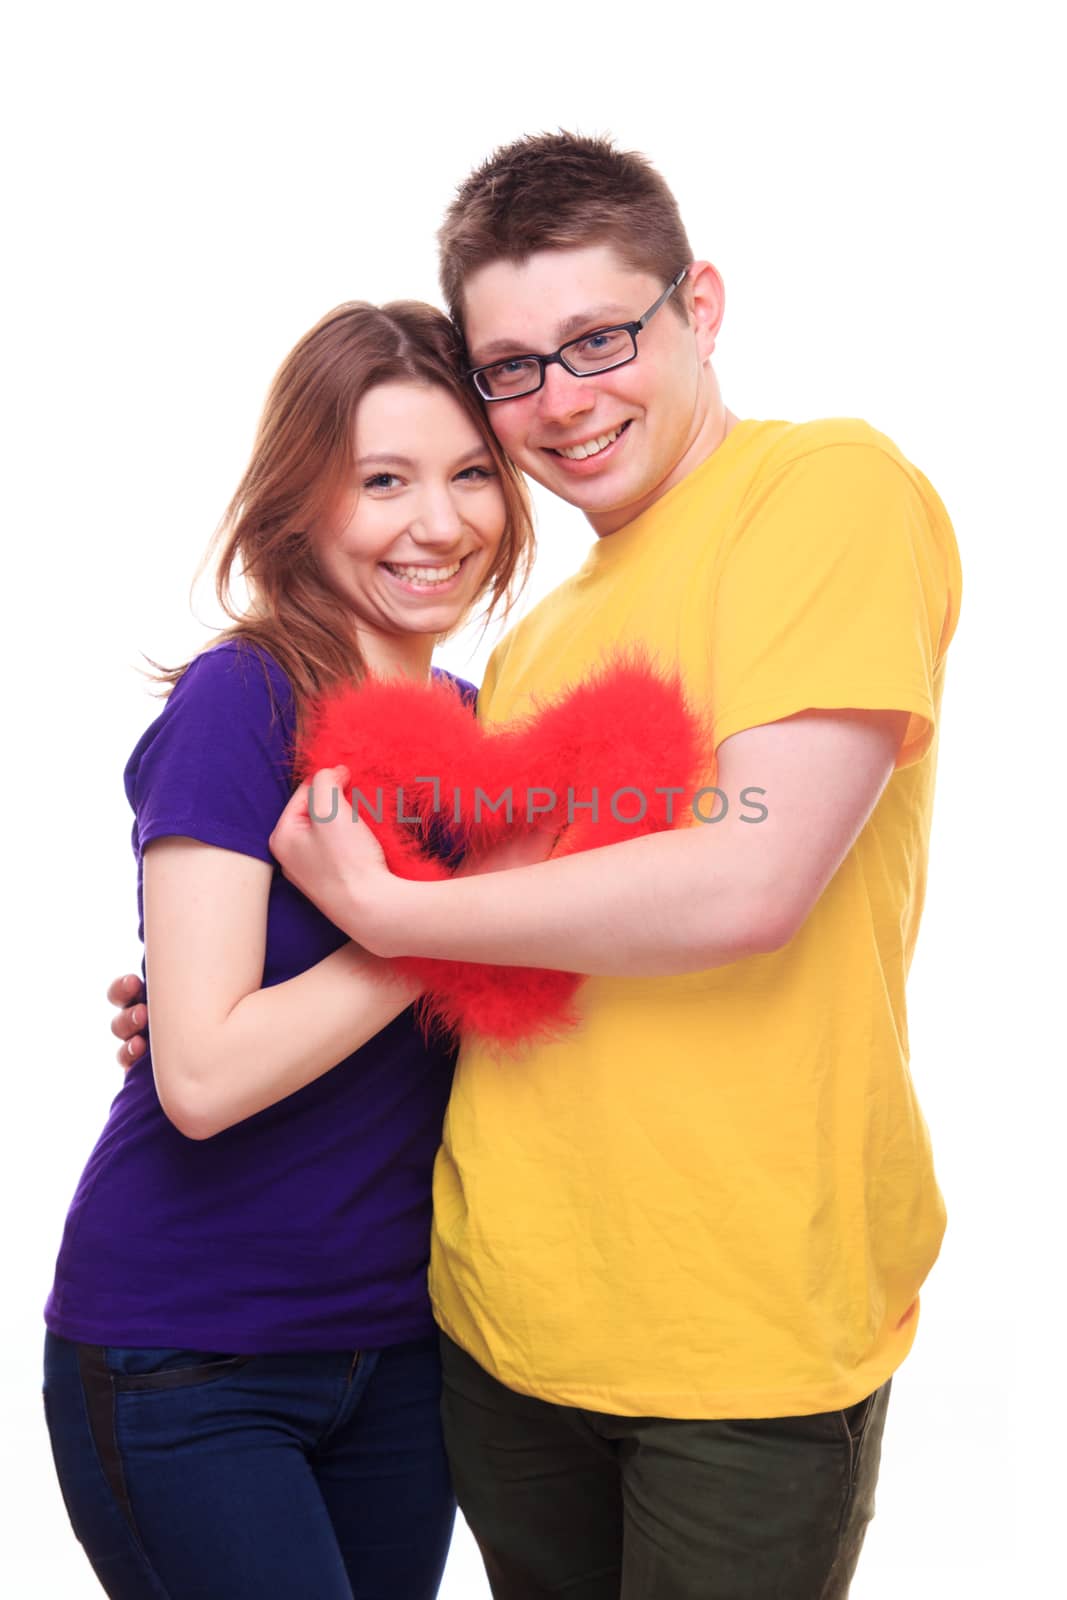 Young people in love holding heart - studio shoot 